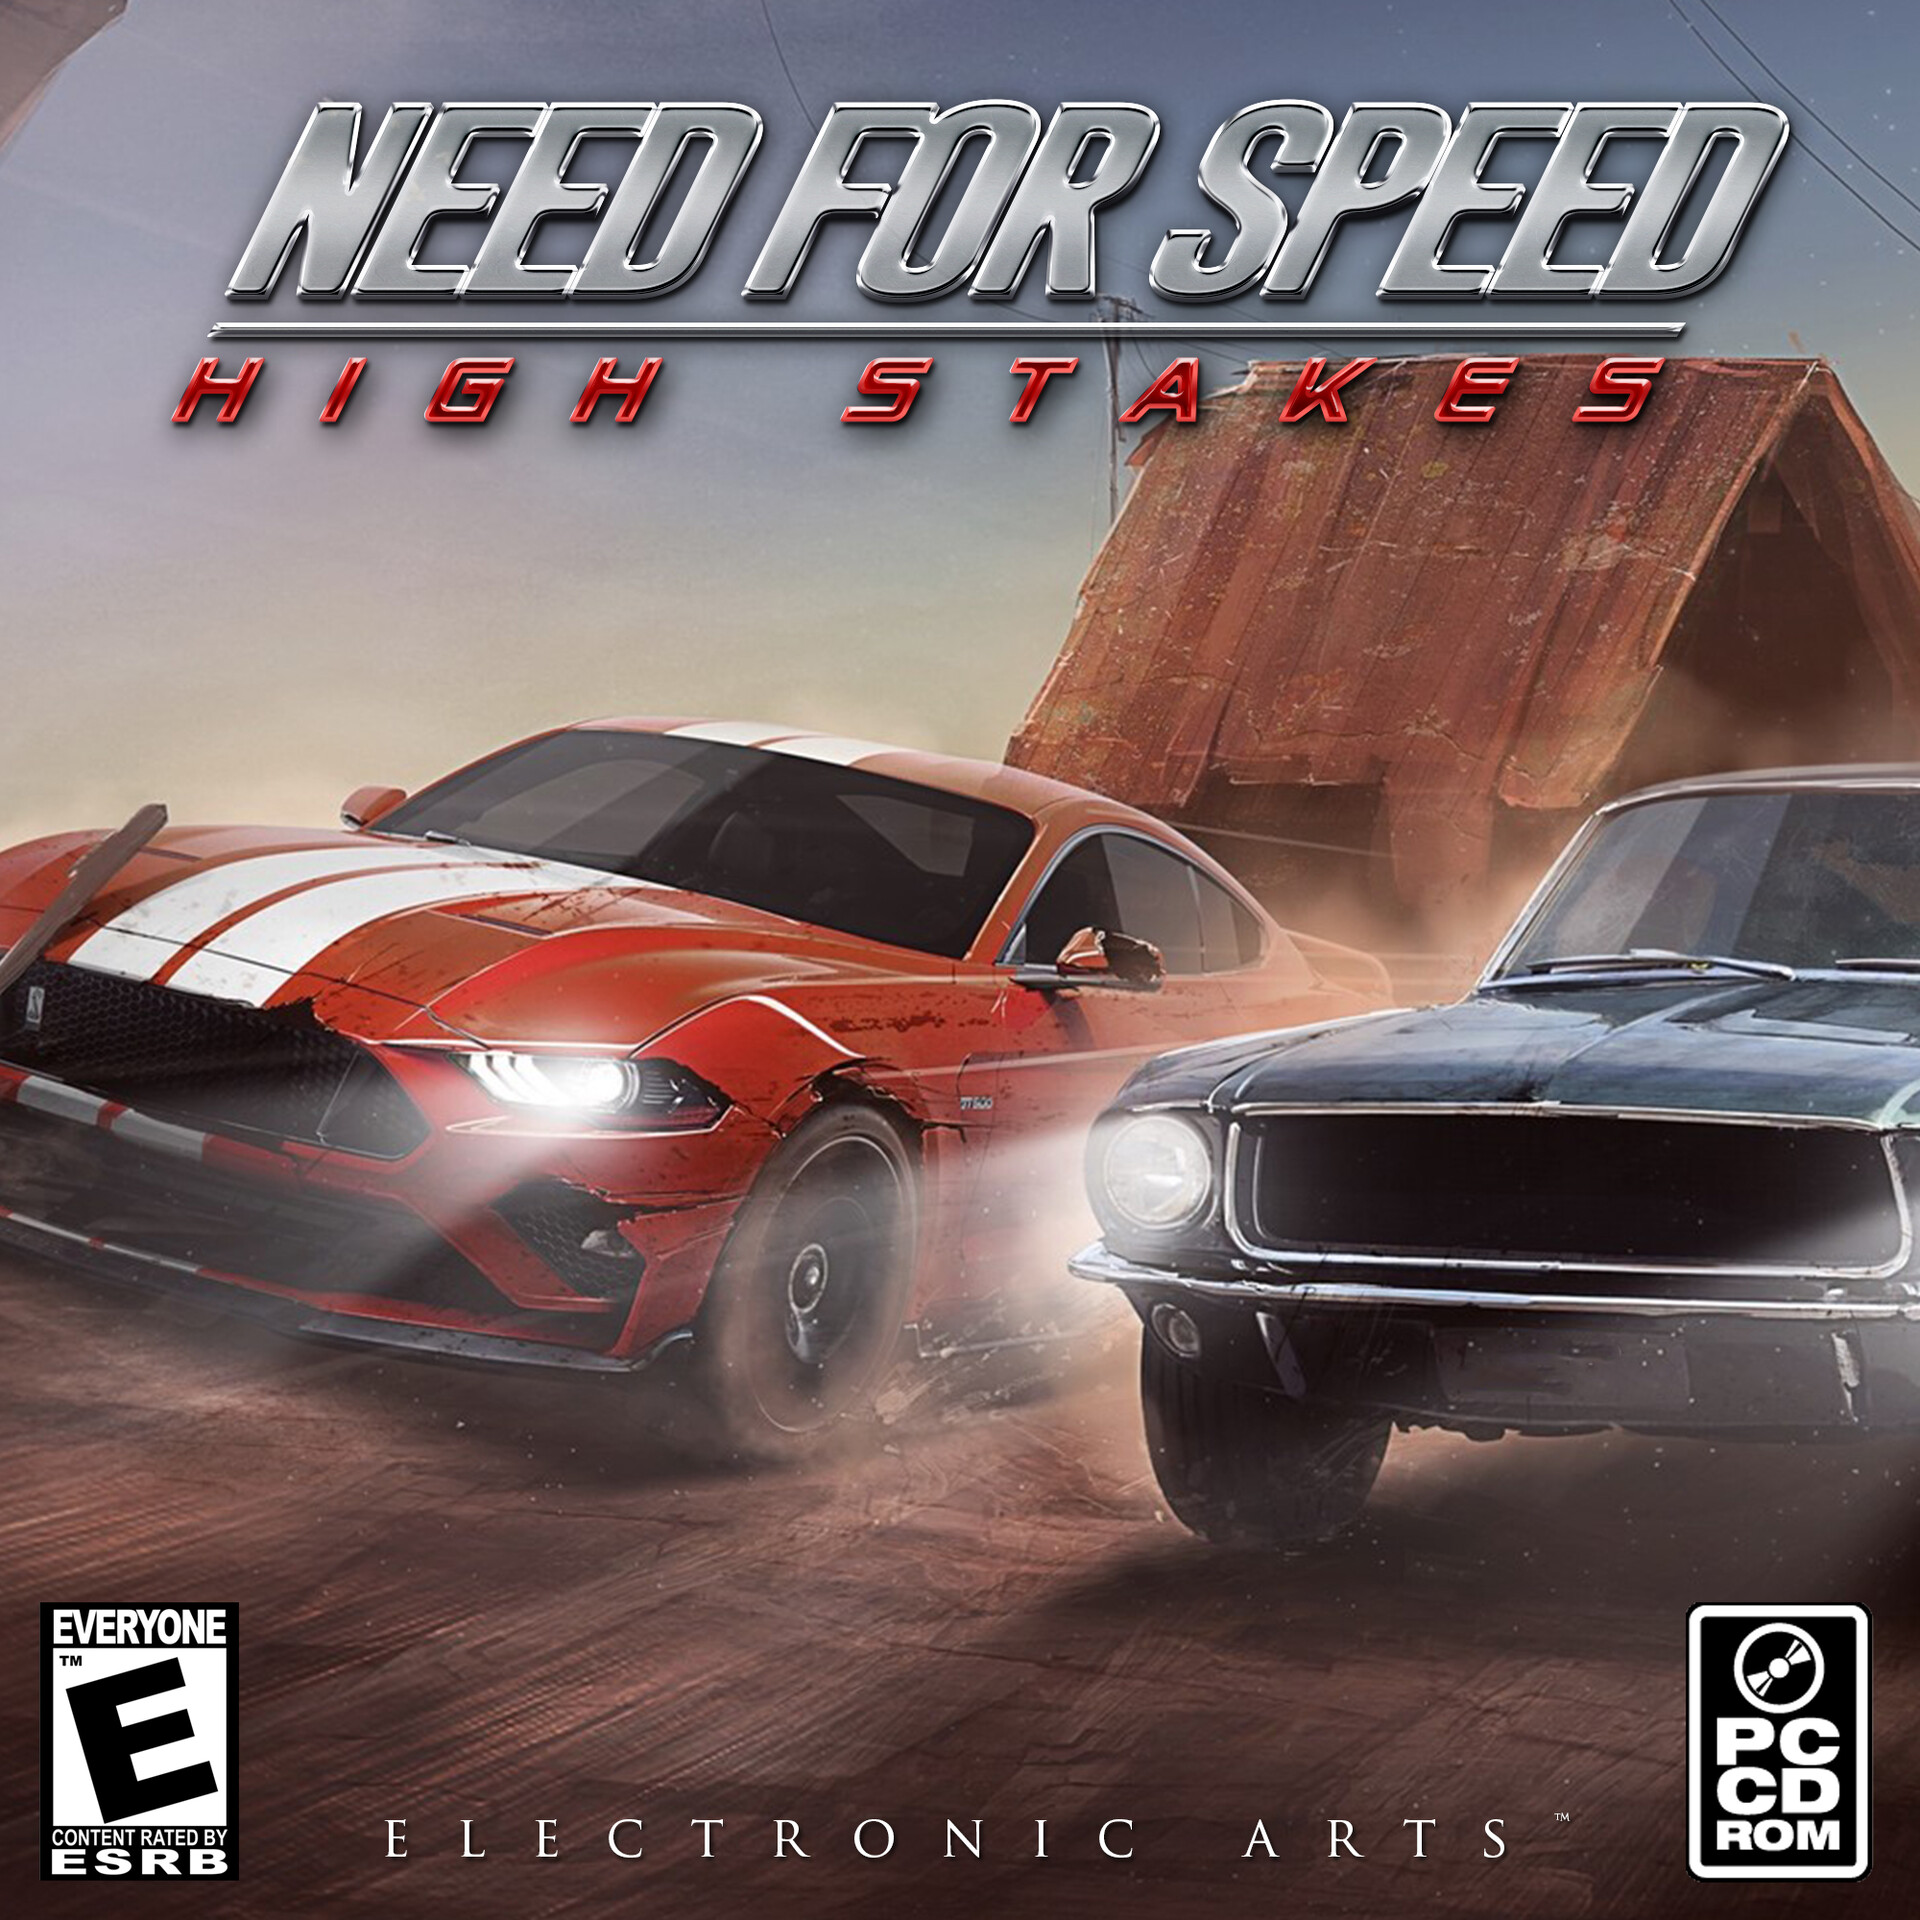 Nfs unbound играть. Need for Speed ps1. Нфс 4 High stakes диск. NFS 4. Need for Speed Unbound 1 PLAYSTATION 2 диск.